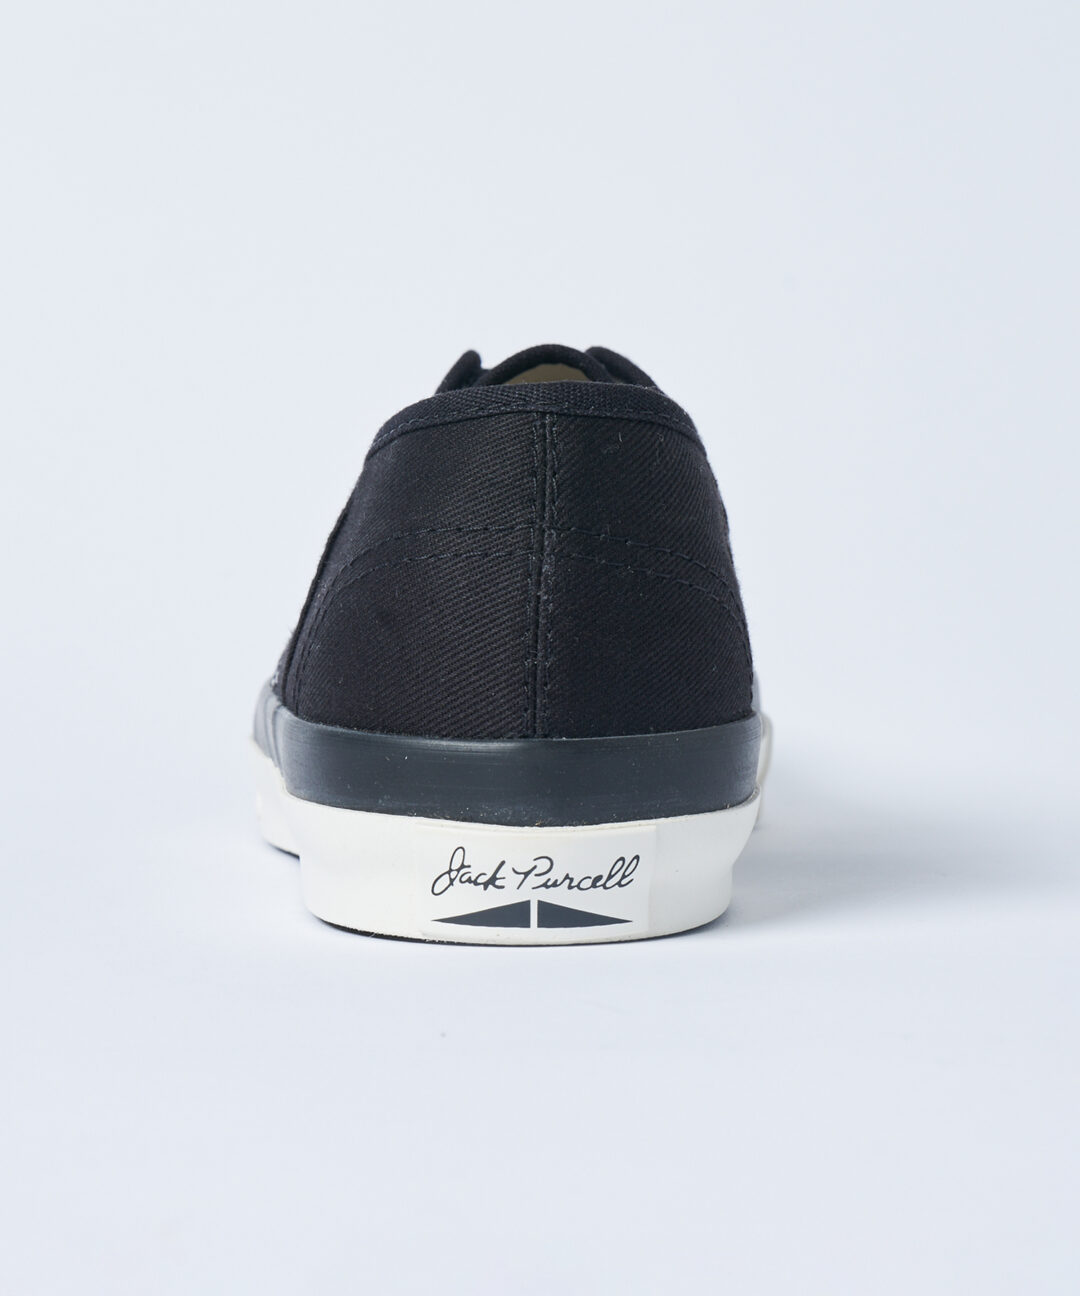 CONVERSE JACK PURCELL for BIOTOP 第9弾「JACK PURCELL RET RLY / BT」が1/26発売 (コンバース ビオトープ ジャック パーセル)